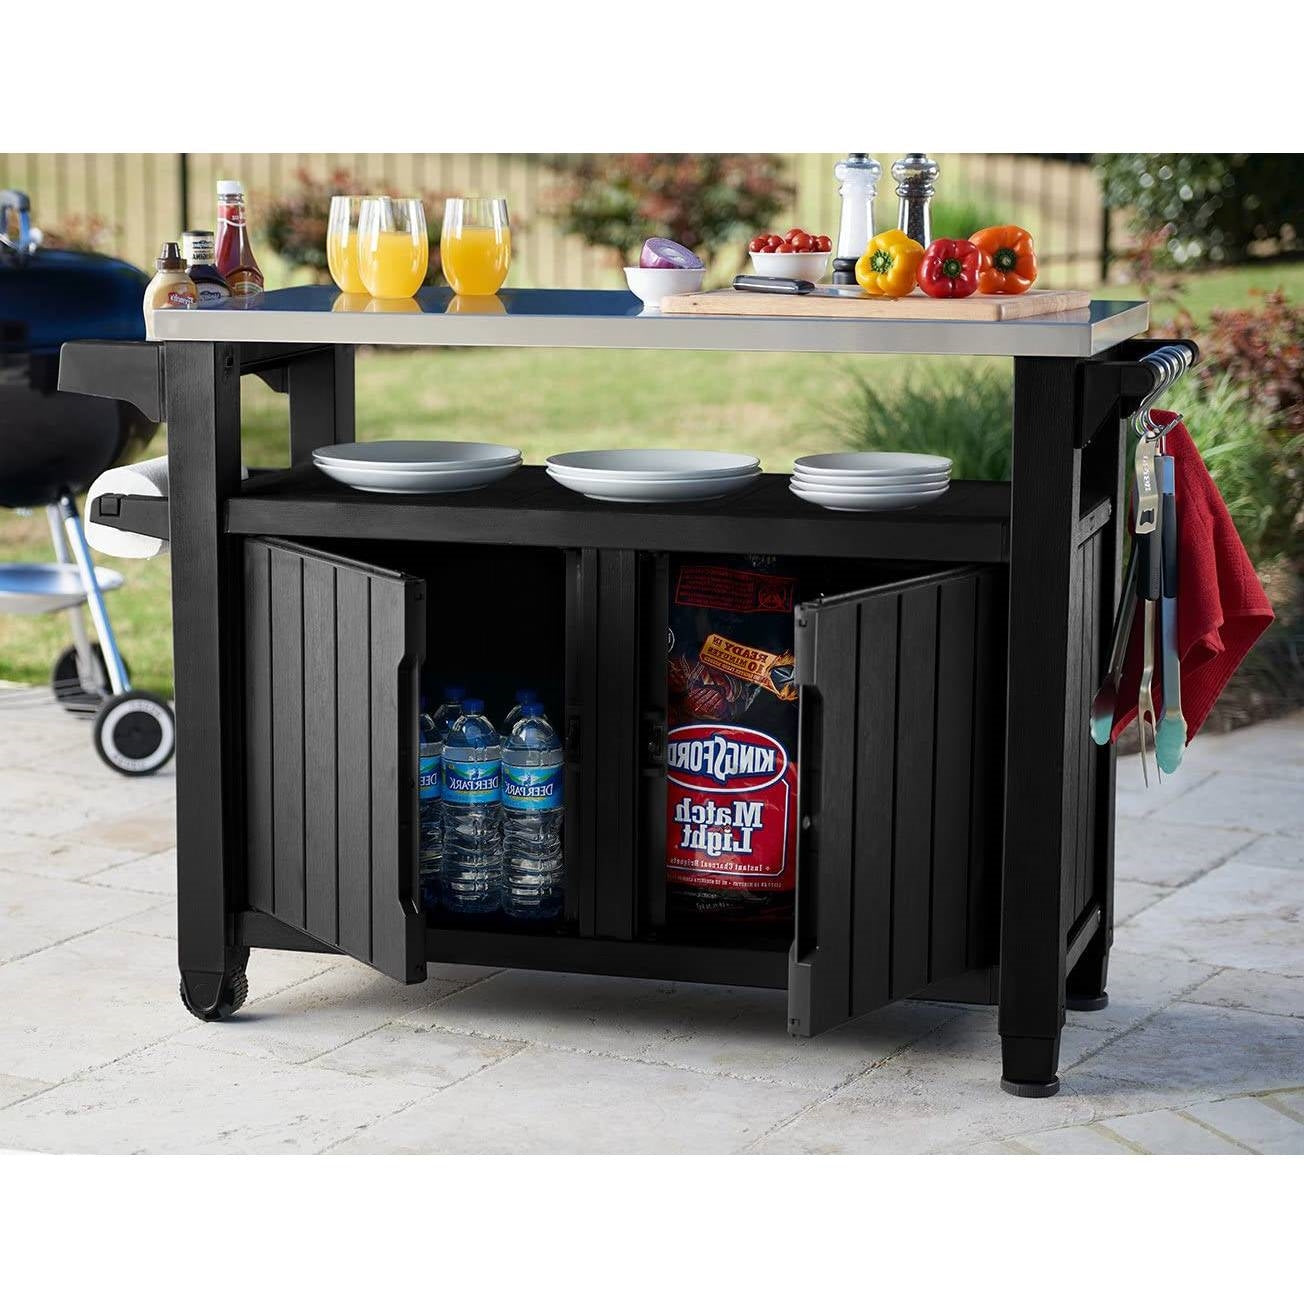 Outdoor > Outdoor Furniture > Patio Tables - Outdoor Grill Party Bar Serving Cart With Storage In Graphite Grey